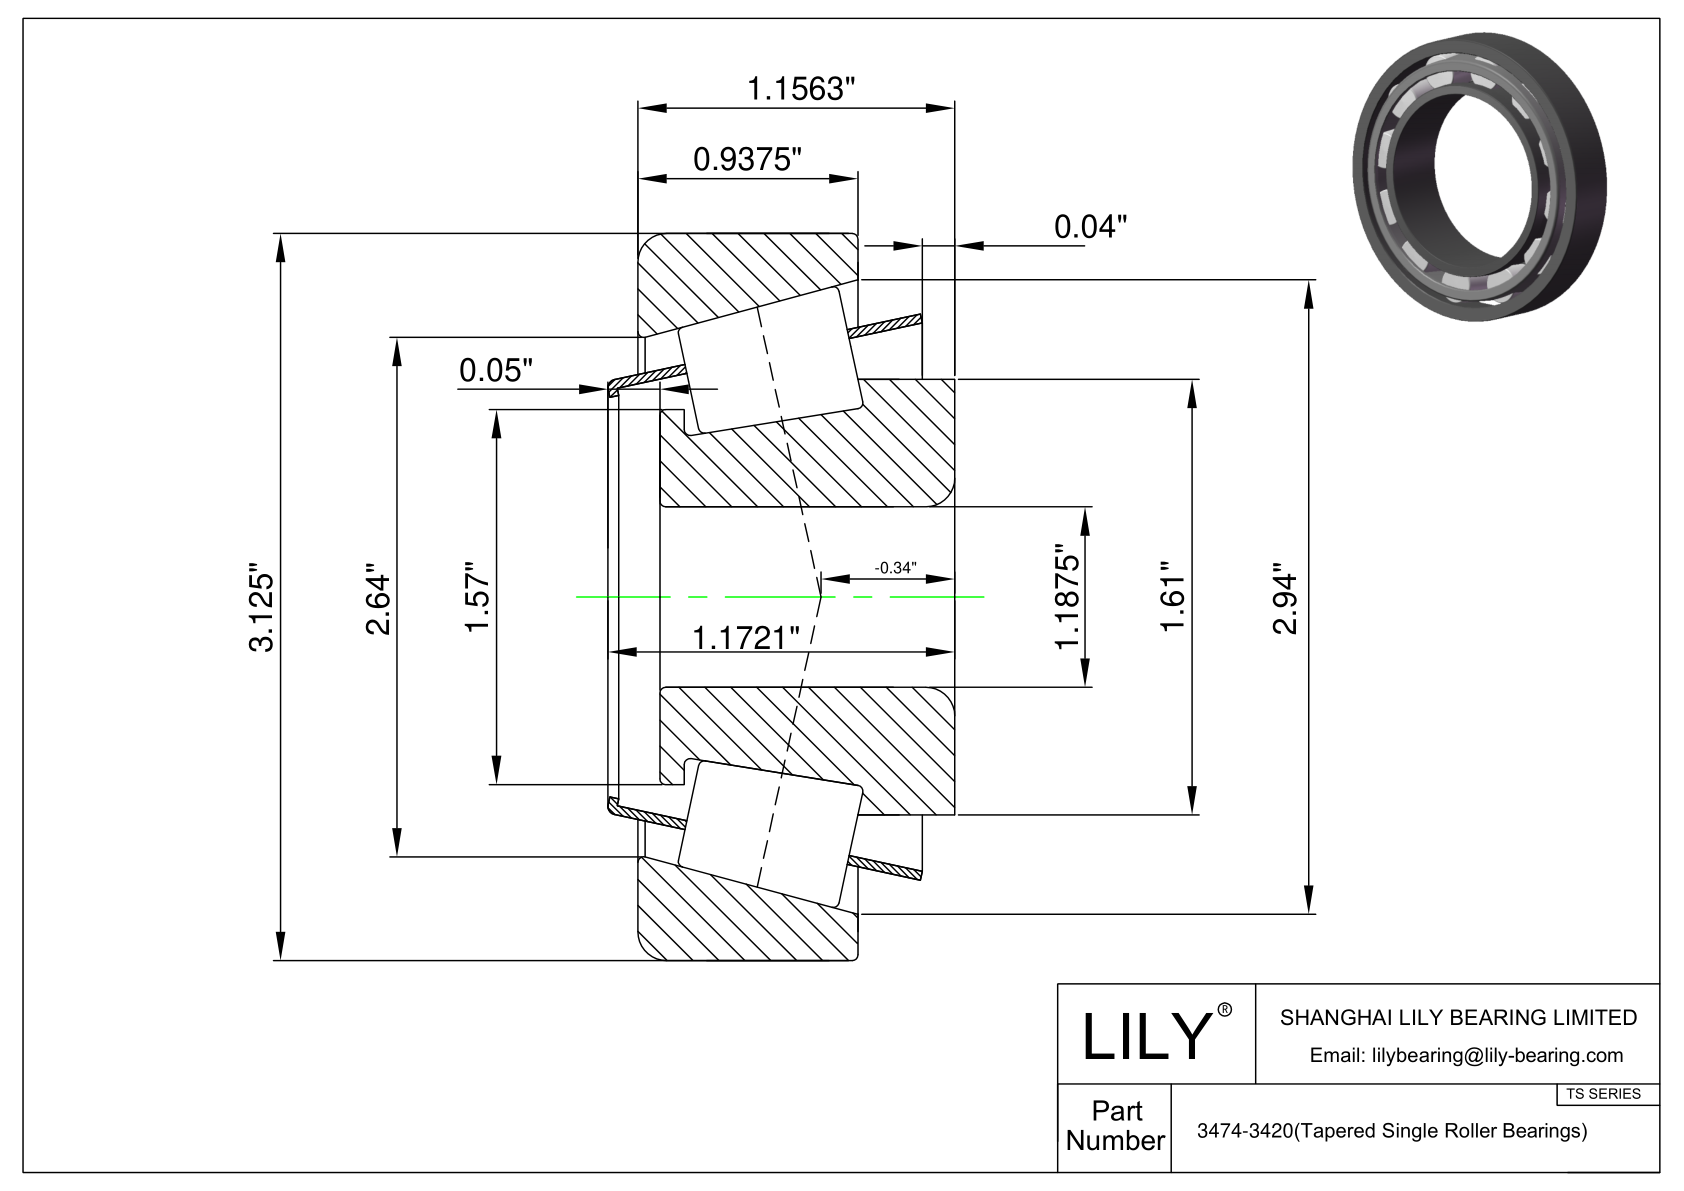 3474-3420 TS (Tapered Single Roller Bearings) (Imperial) cad drawing